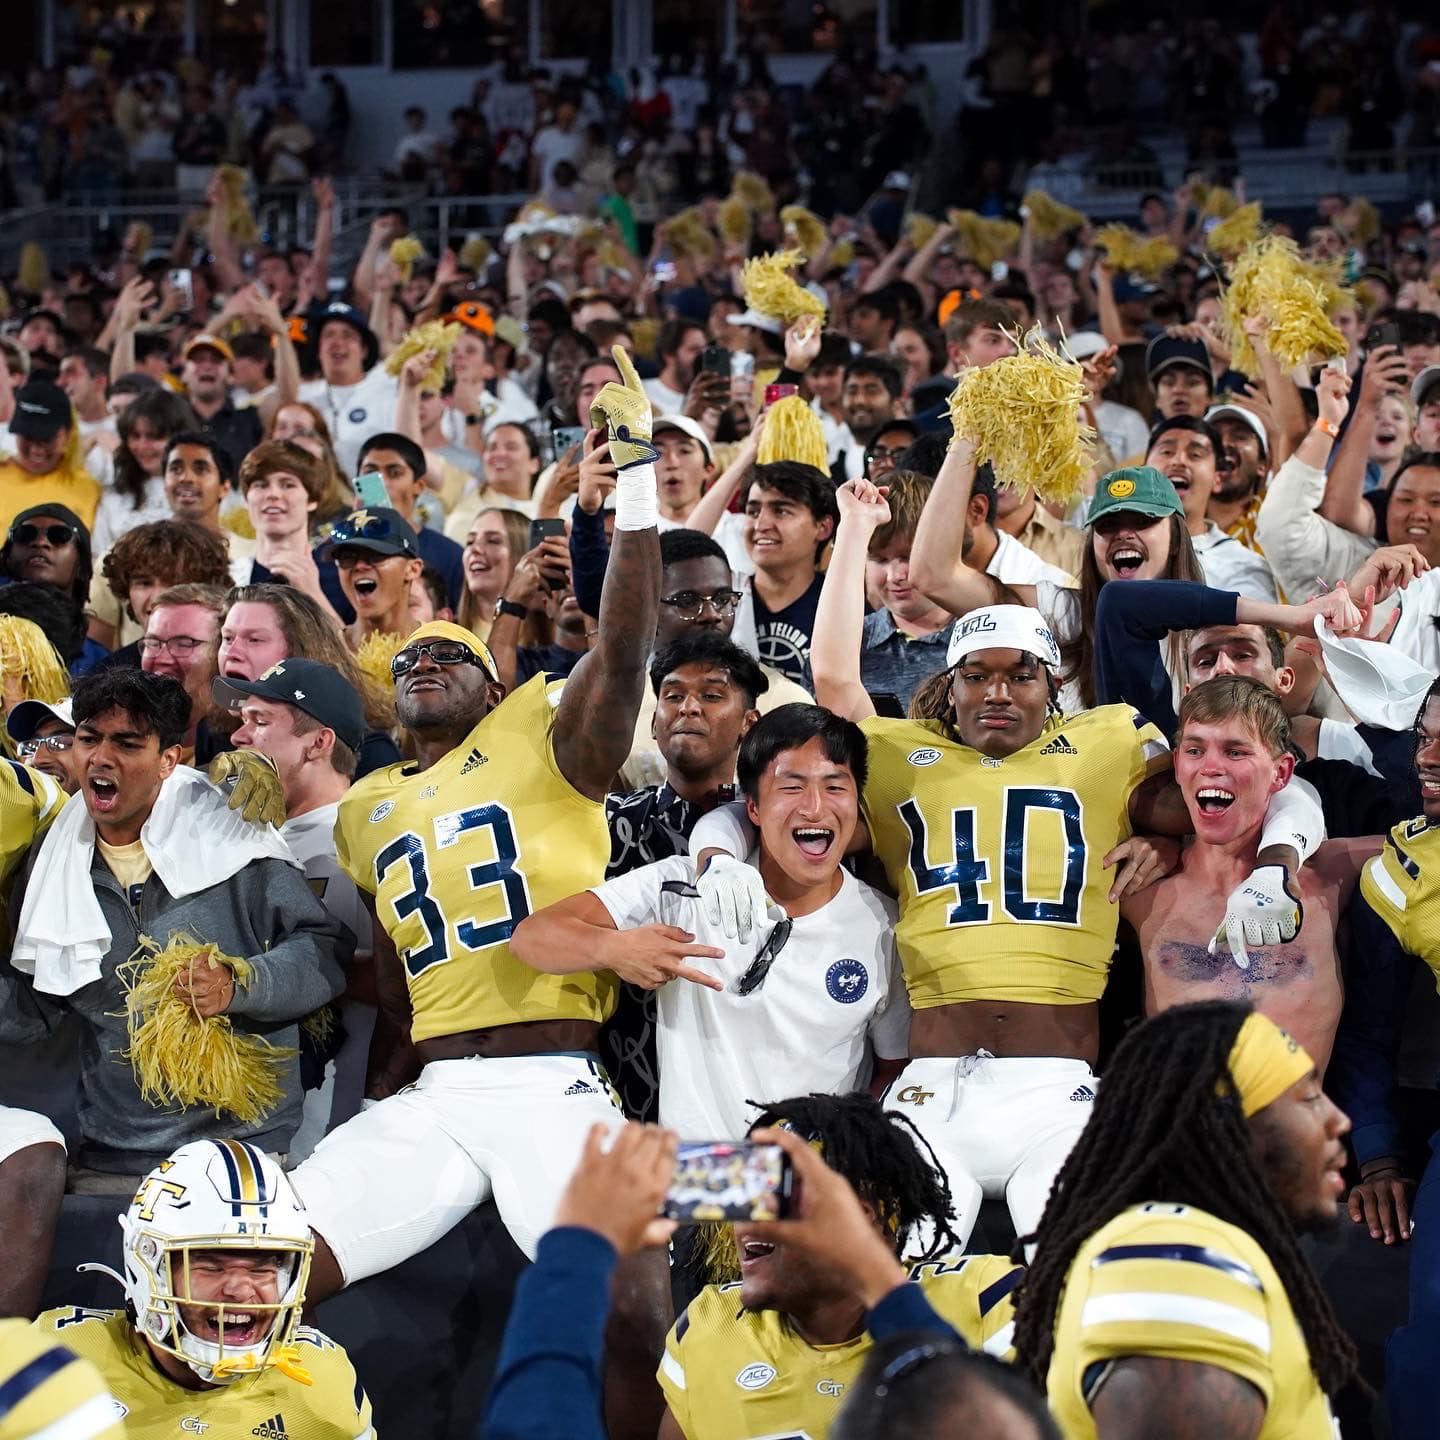 Georgia Tech football players join fans in the stands to celebrate the victory.